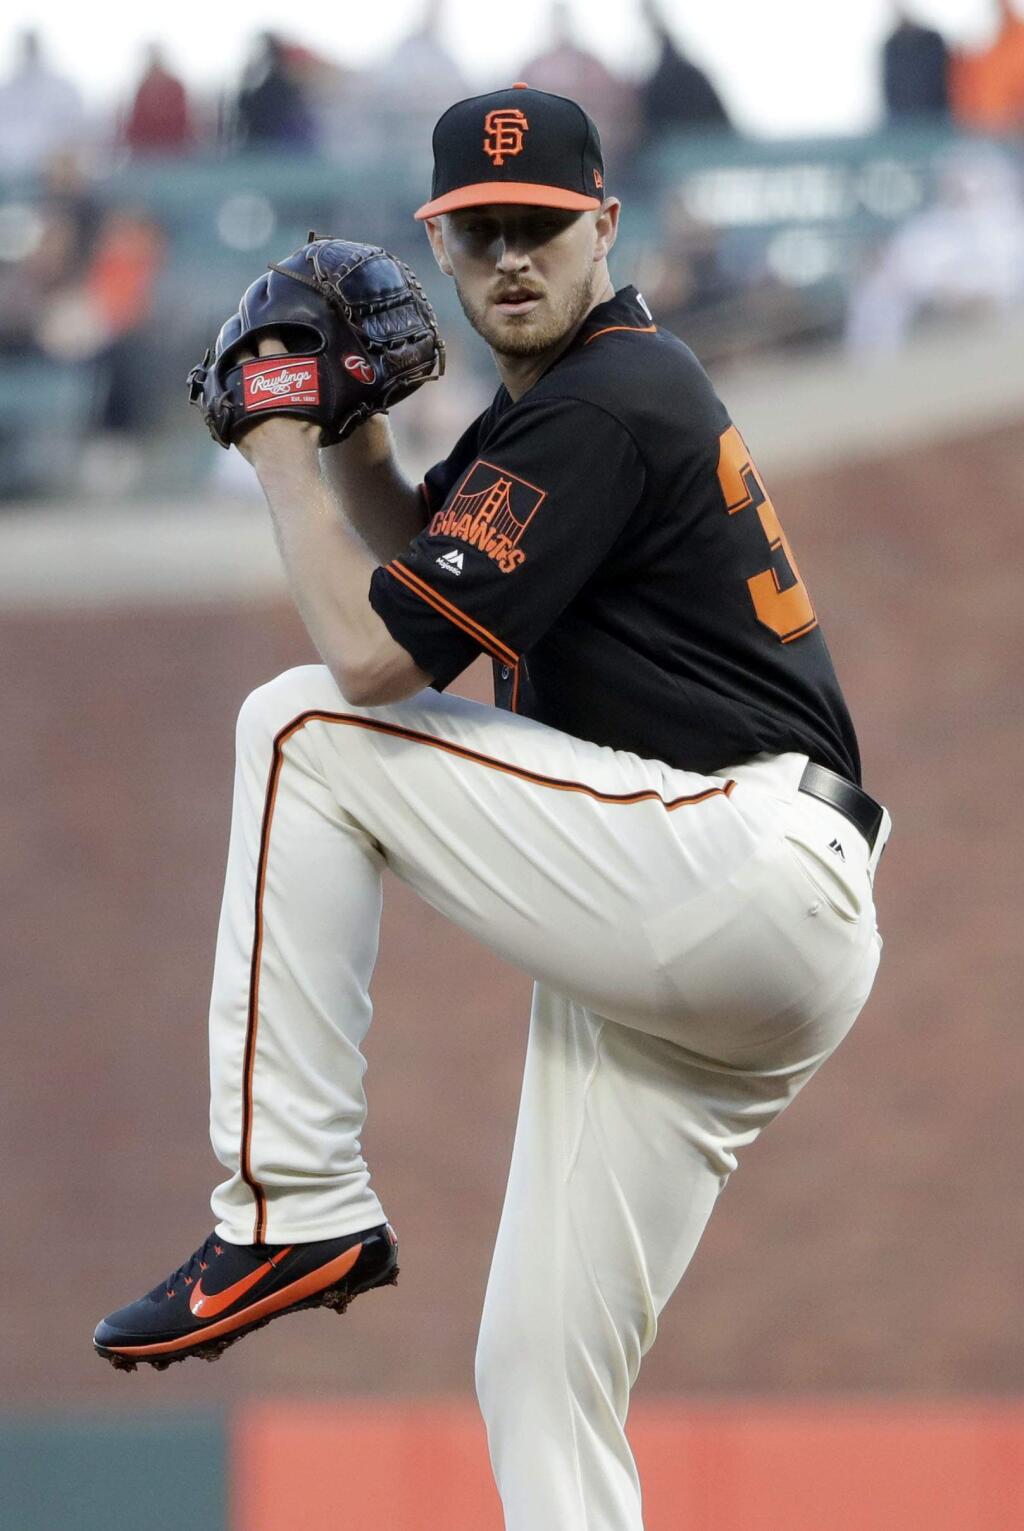 San Francisco Giants starting pitcher Chris Stratton throws to the Washington Nationals during the first inning of a baseball game Monday, April 23, 2018, in San Francisco. (AP Photo/Marcio Jose Sanchez)